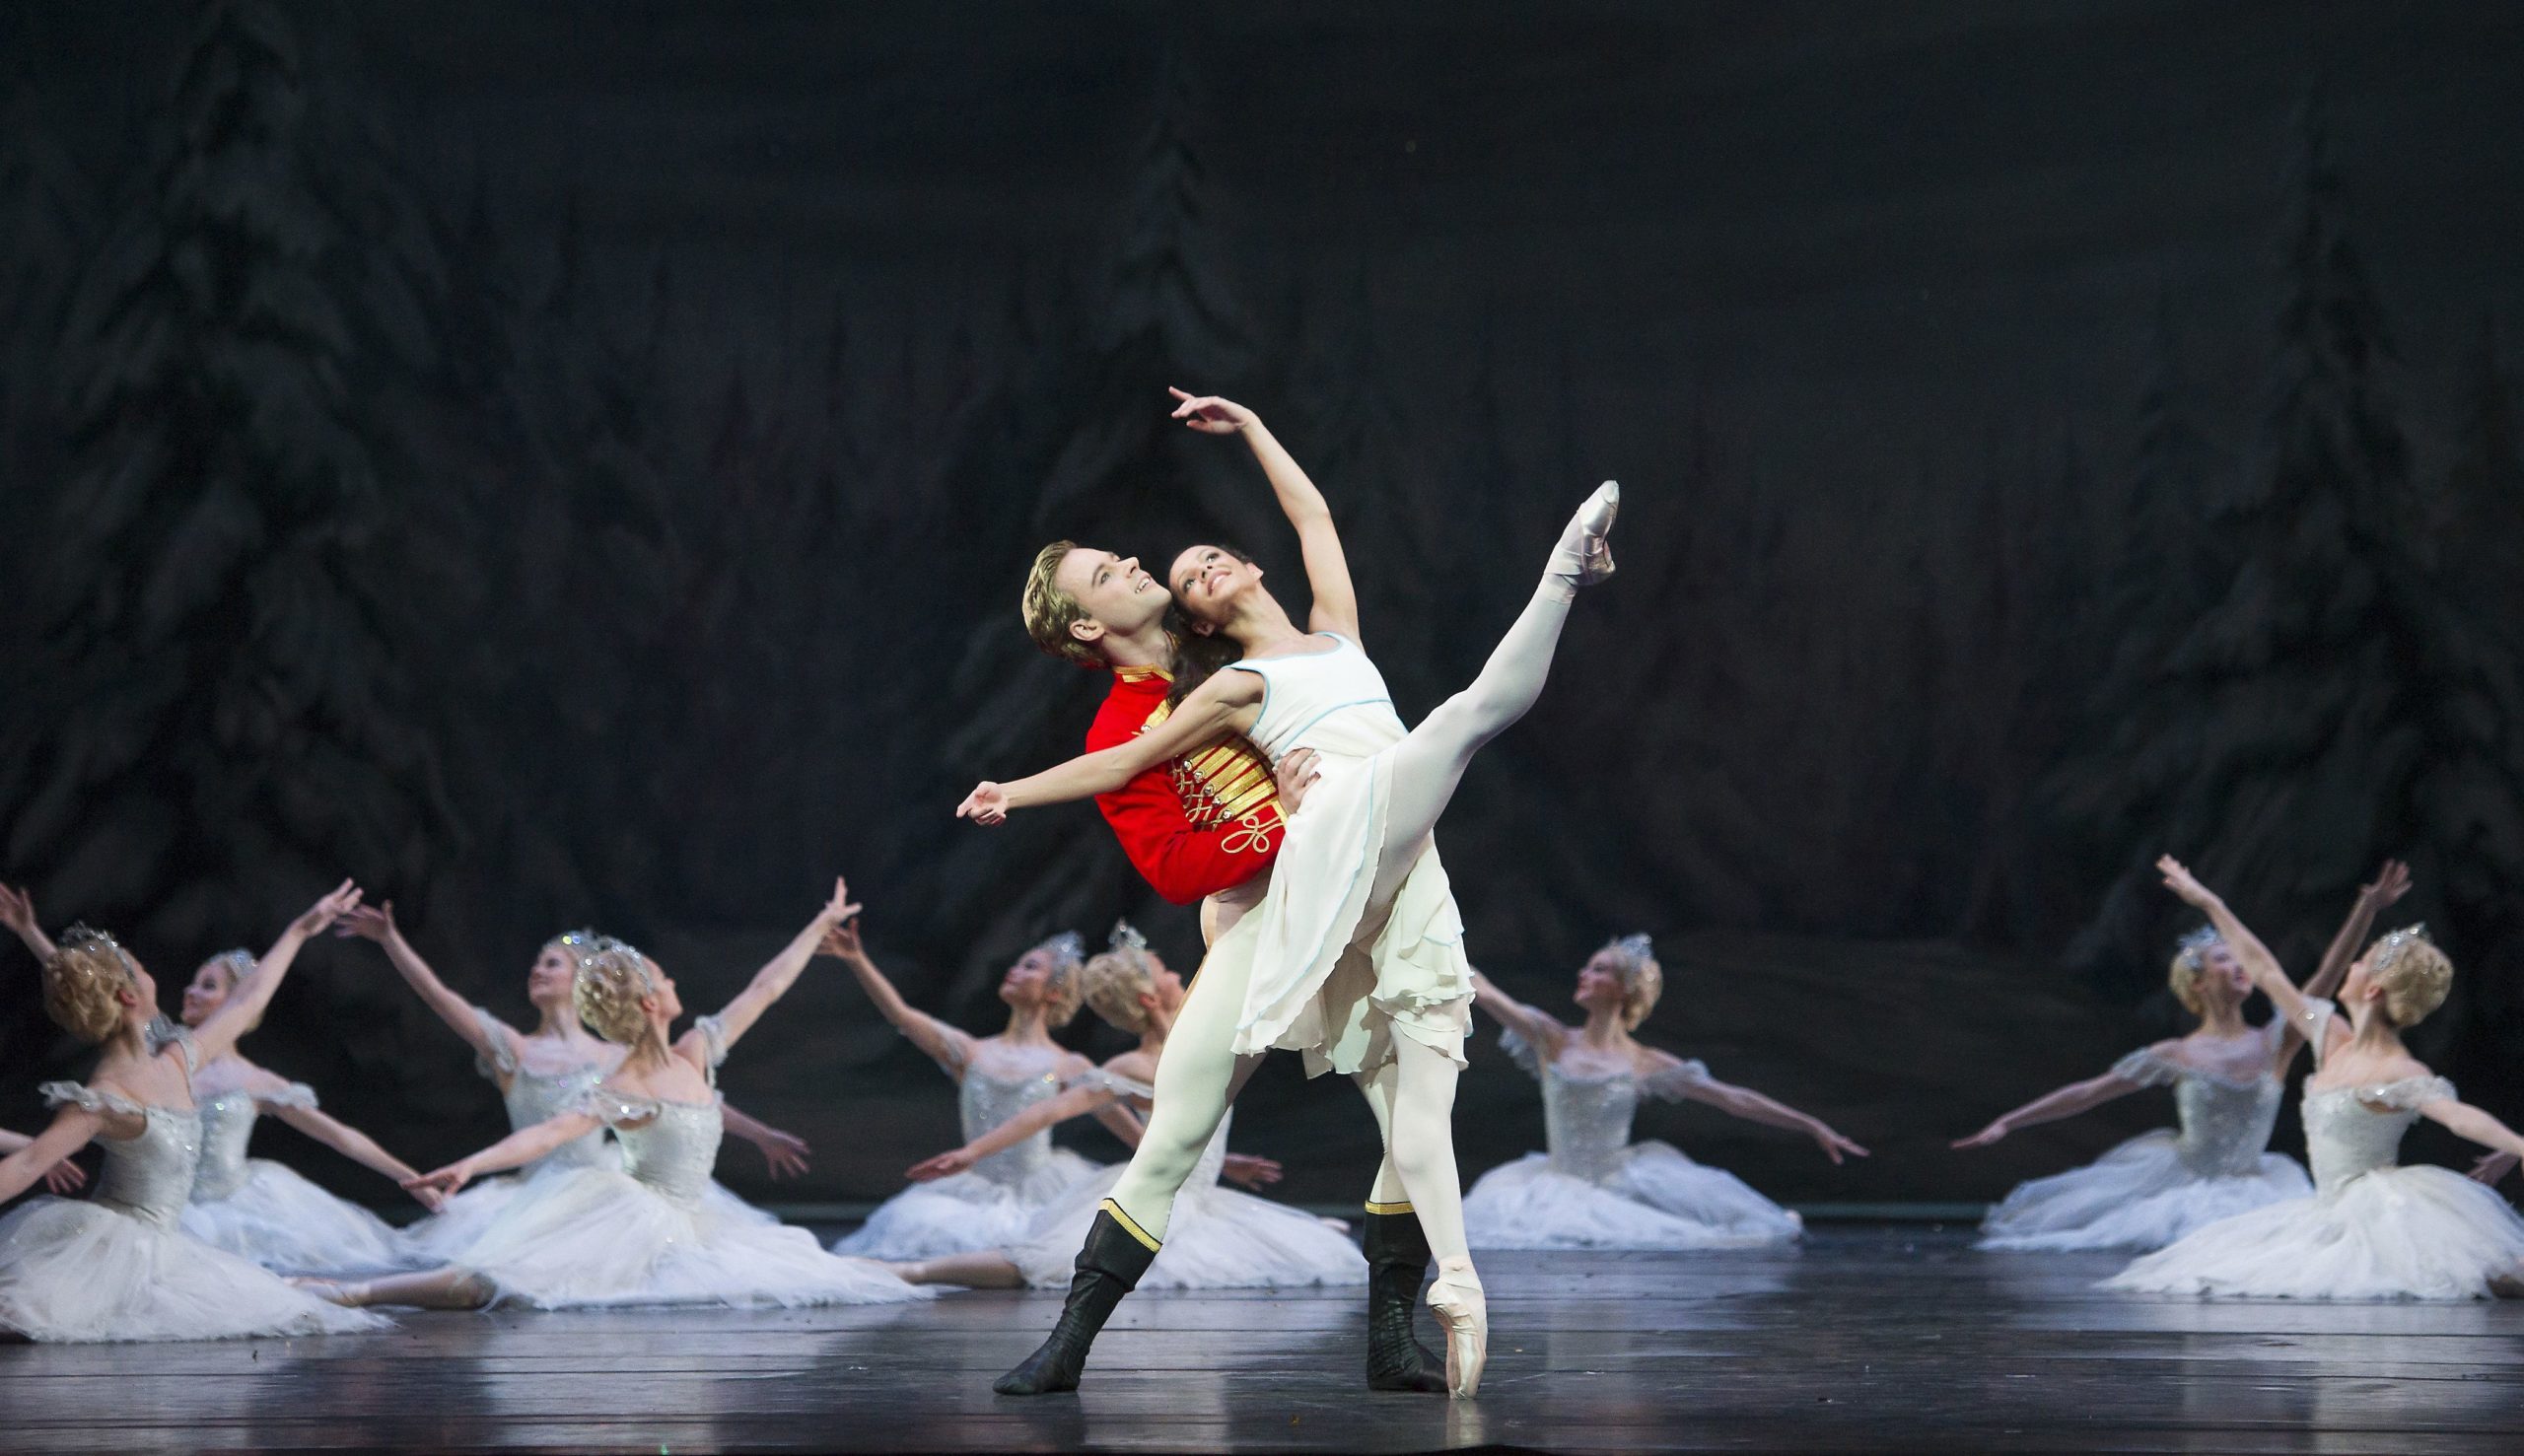 This Year, We'll Watch "The Nutcracker" by New York City Ballet From